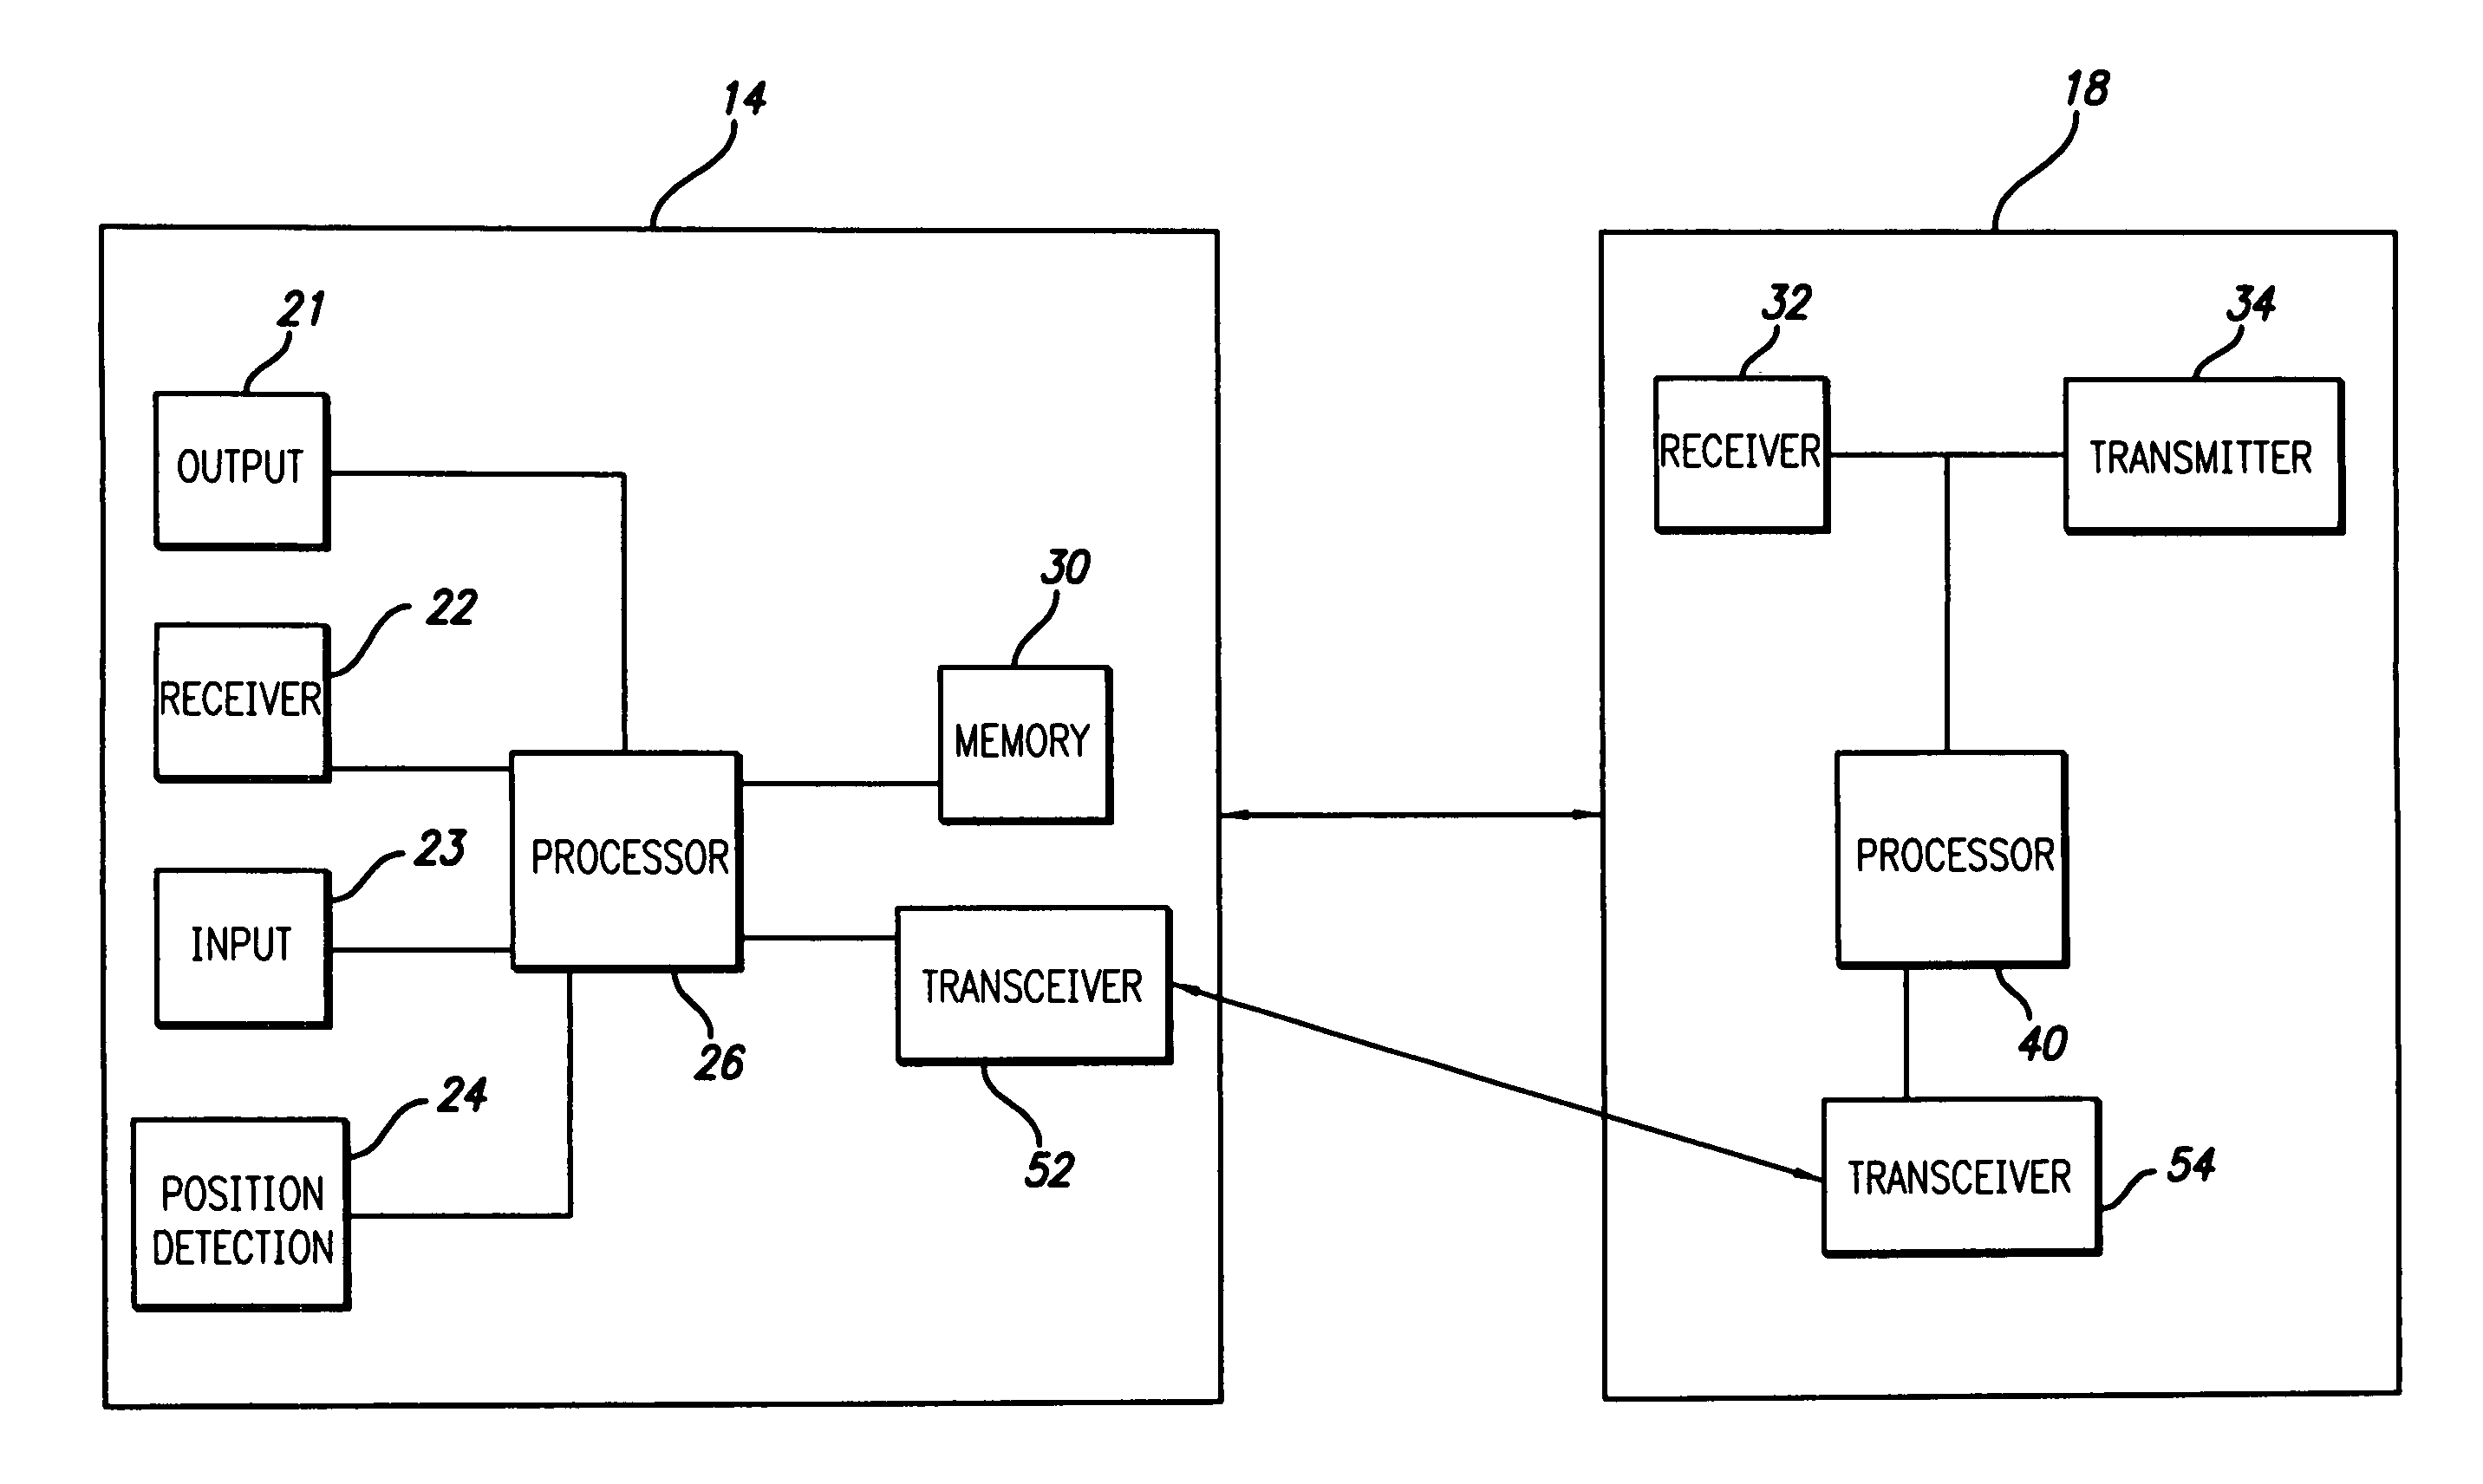 Route calculation method for a vehicle navigation system